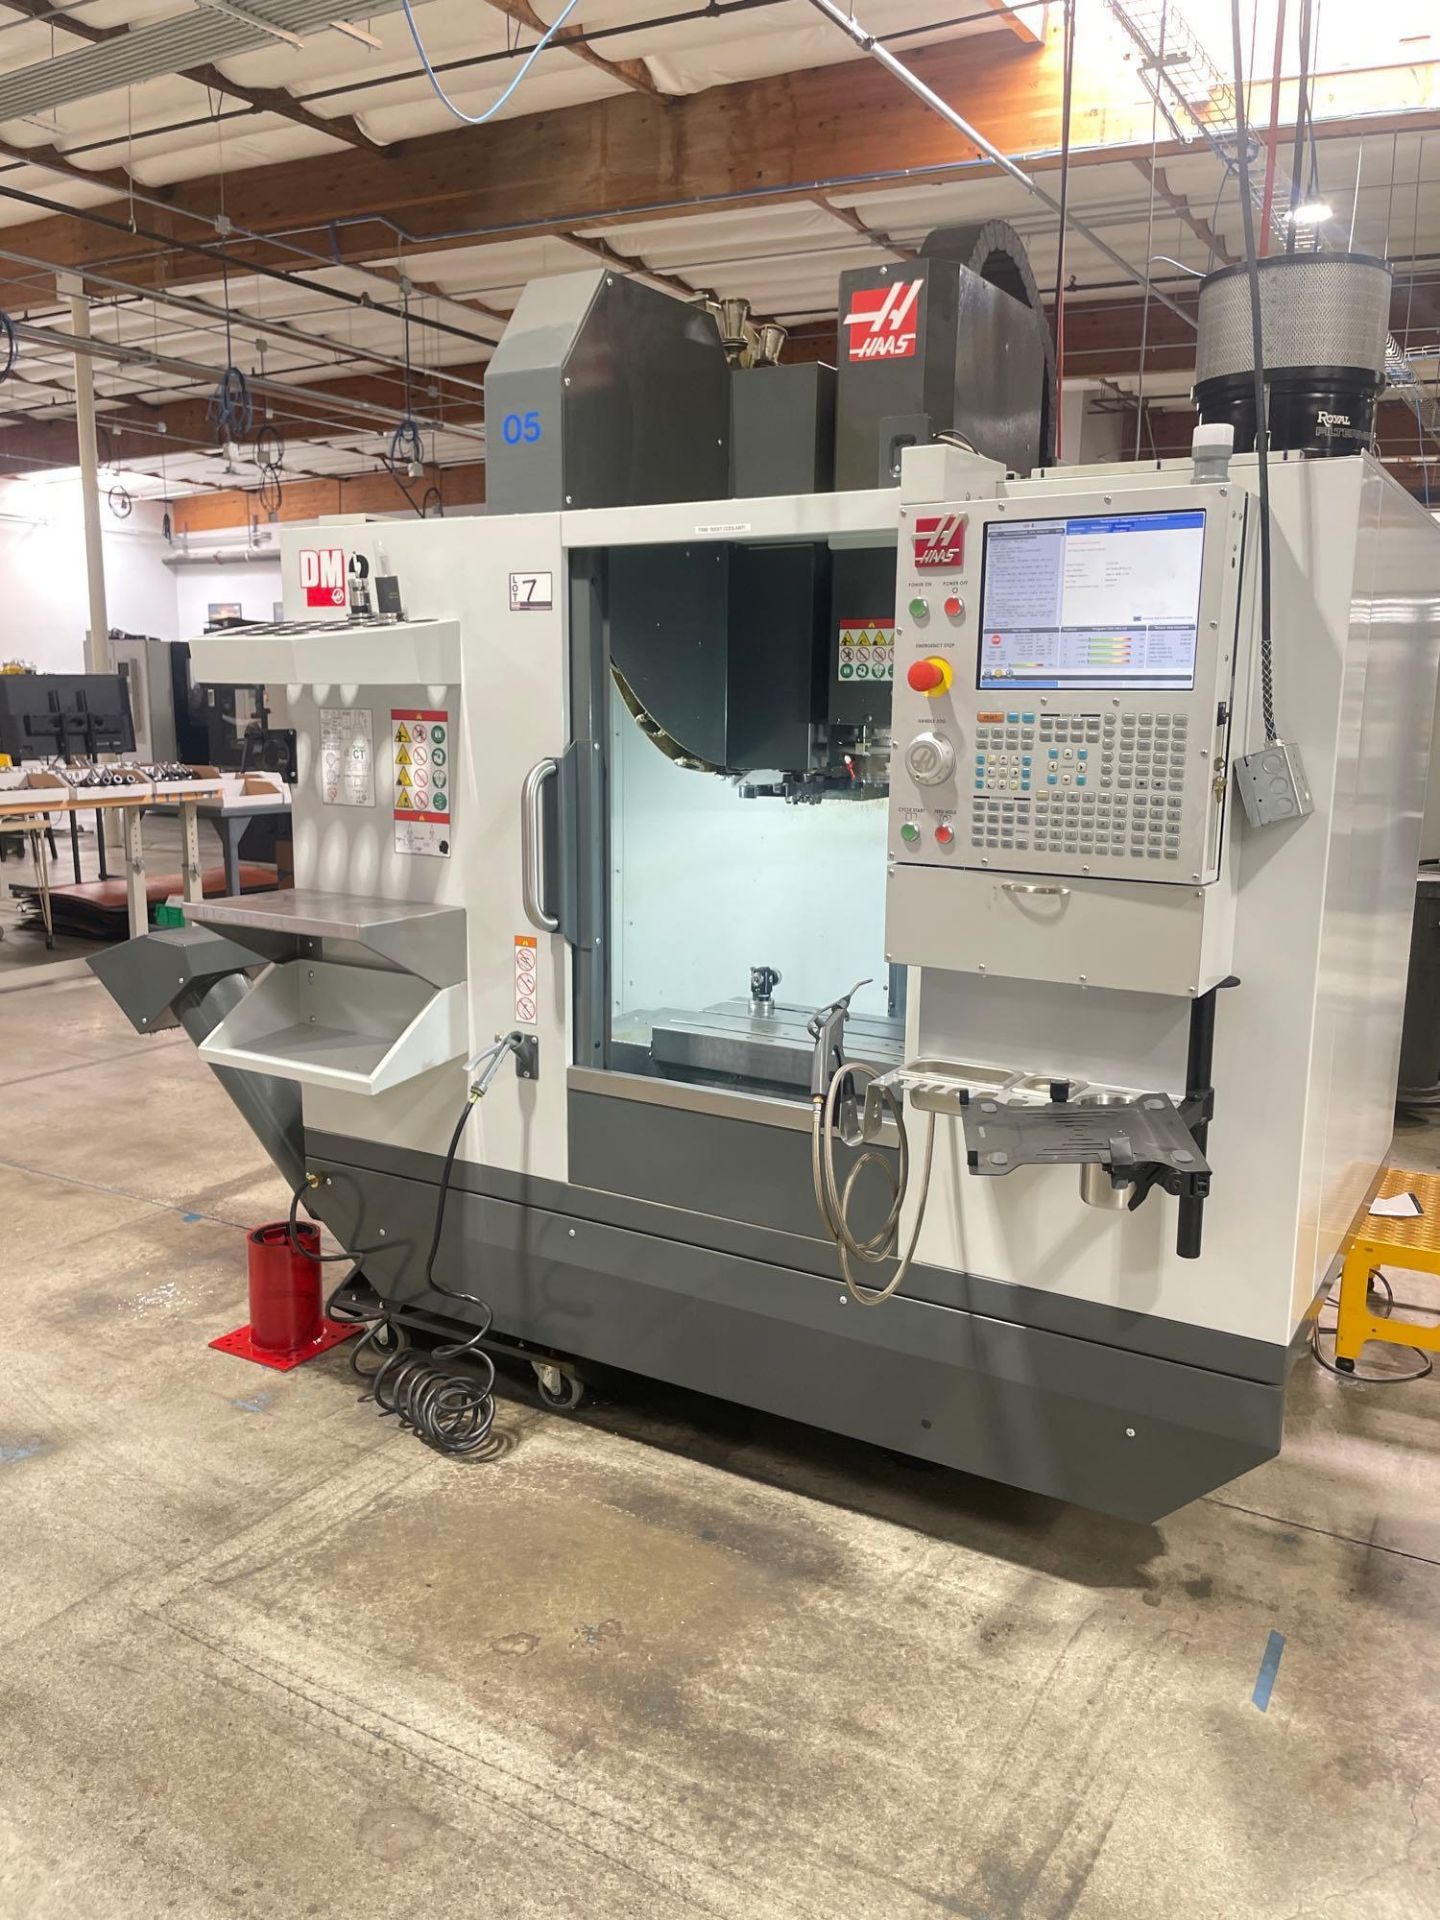 Haas DM-2, 28” x 16” x 15.5” Travels, CT 40, 18+1 SMTC, CTS, WIPS, as New as 2021 - Image 3 of 13